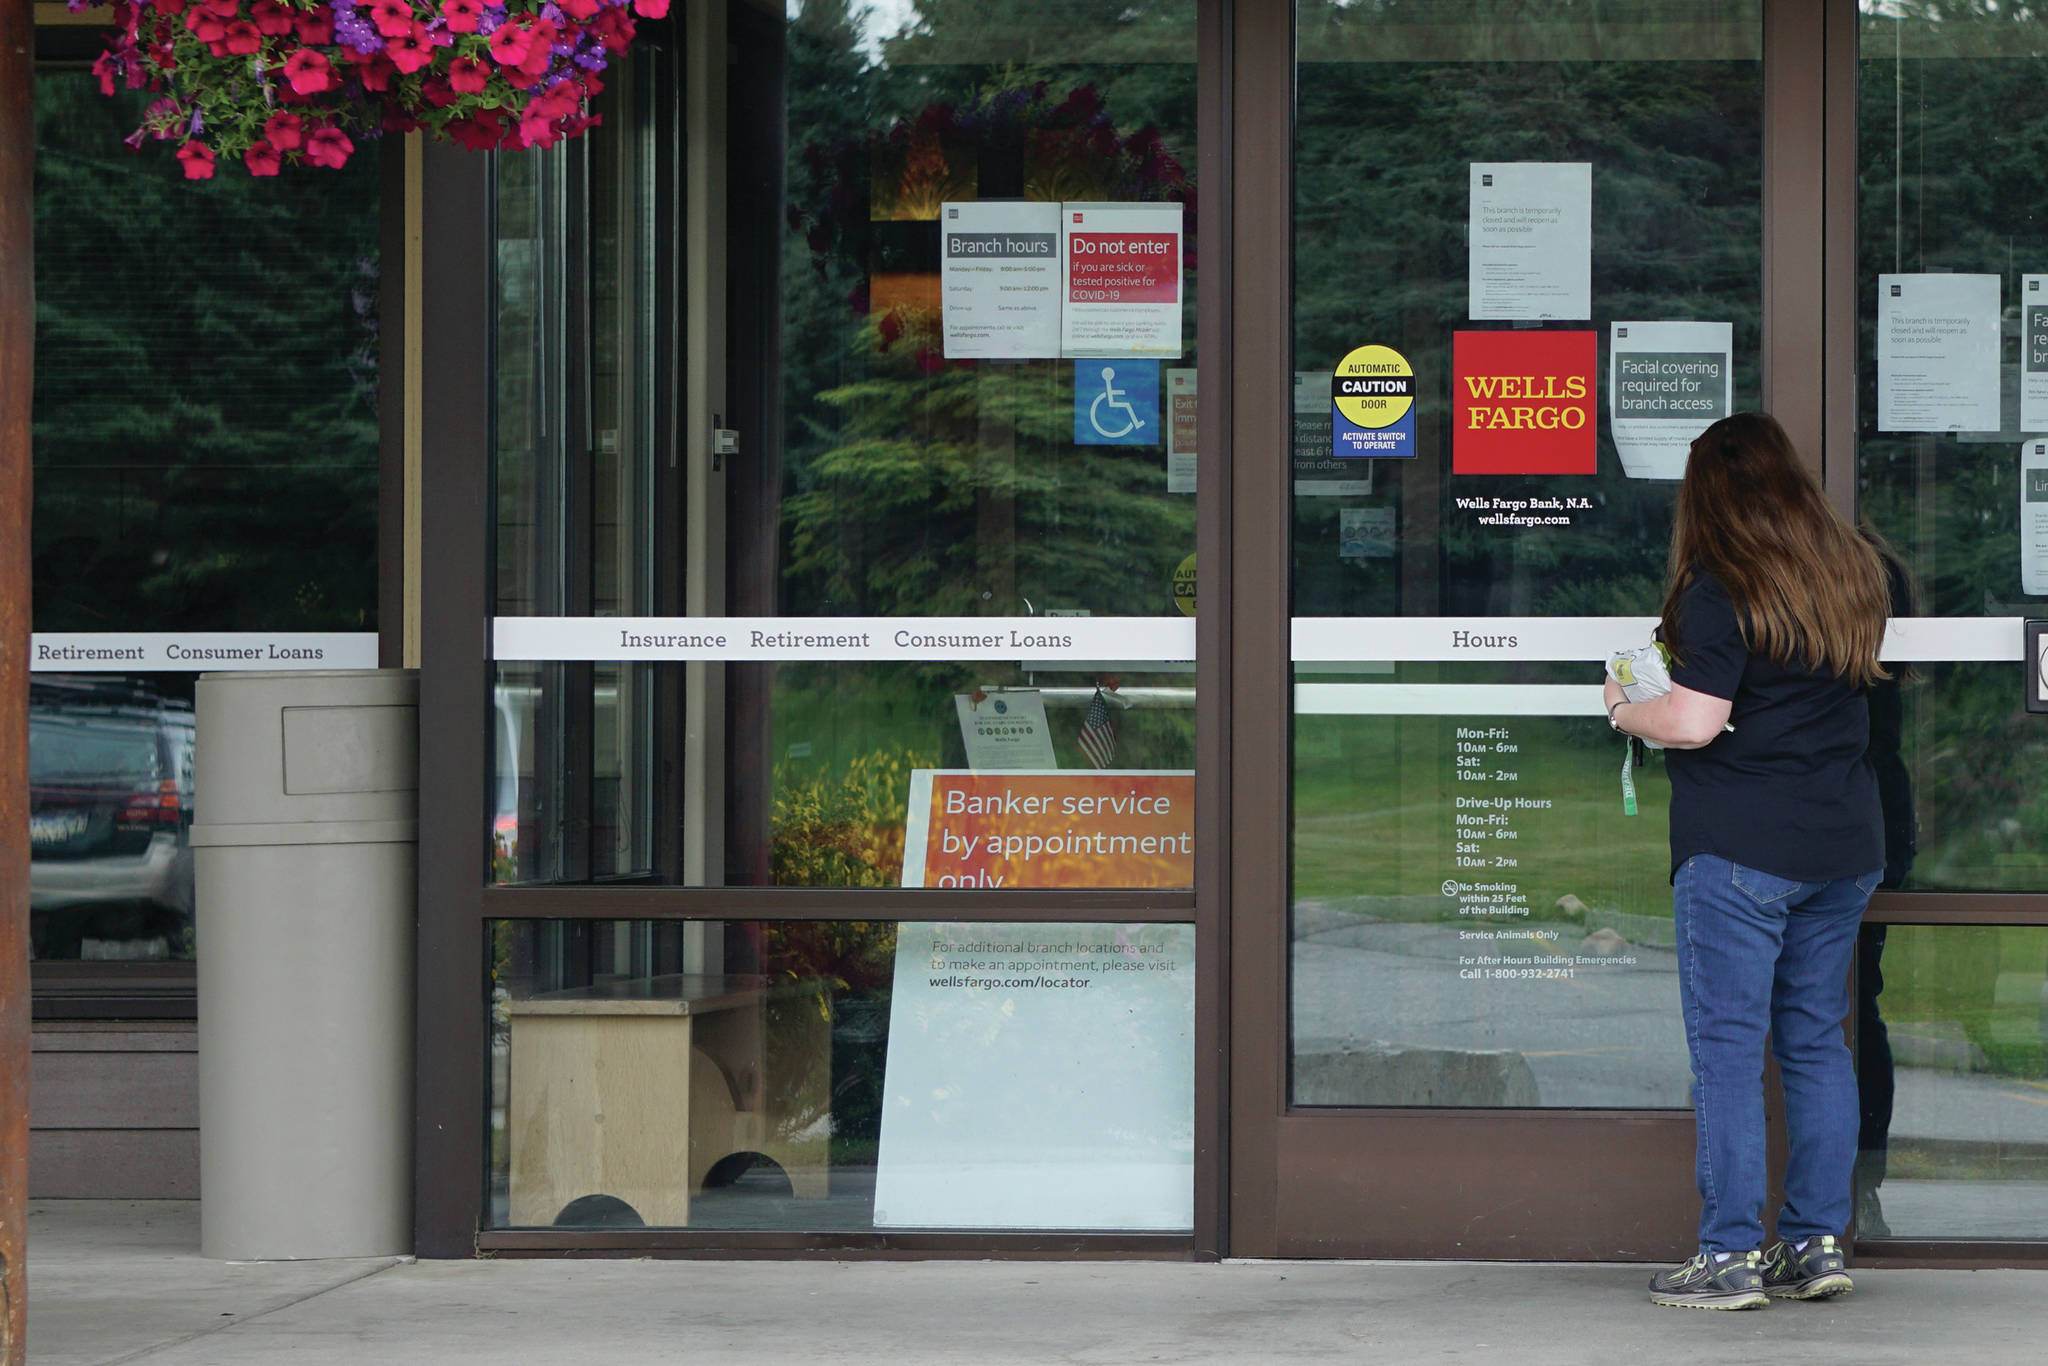 A customer tries to open a closed door on Monday, Aug. 3, 2020, at the Homer branch of Wells Fargo in Homer, Alaska. (Photo by Michael Armstrong/Homer News)